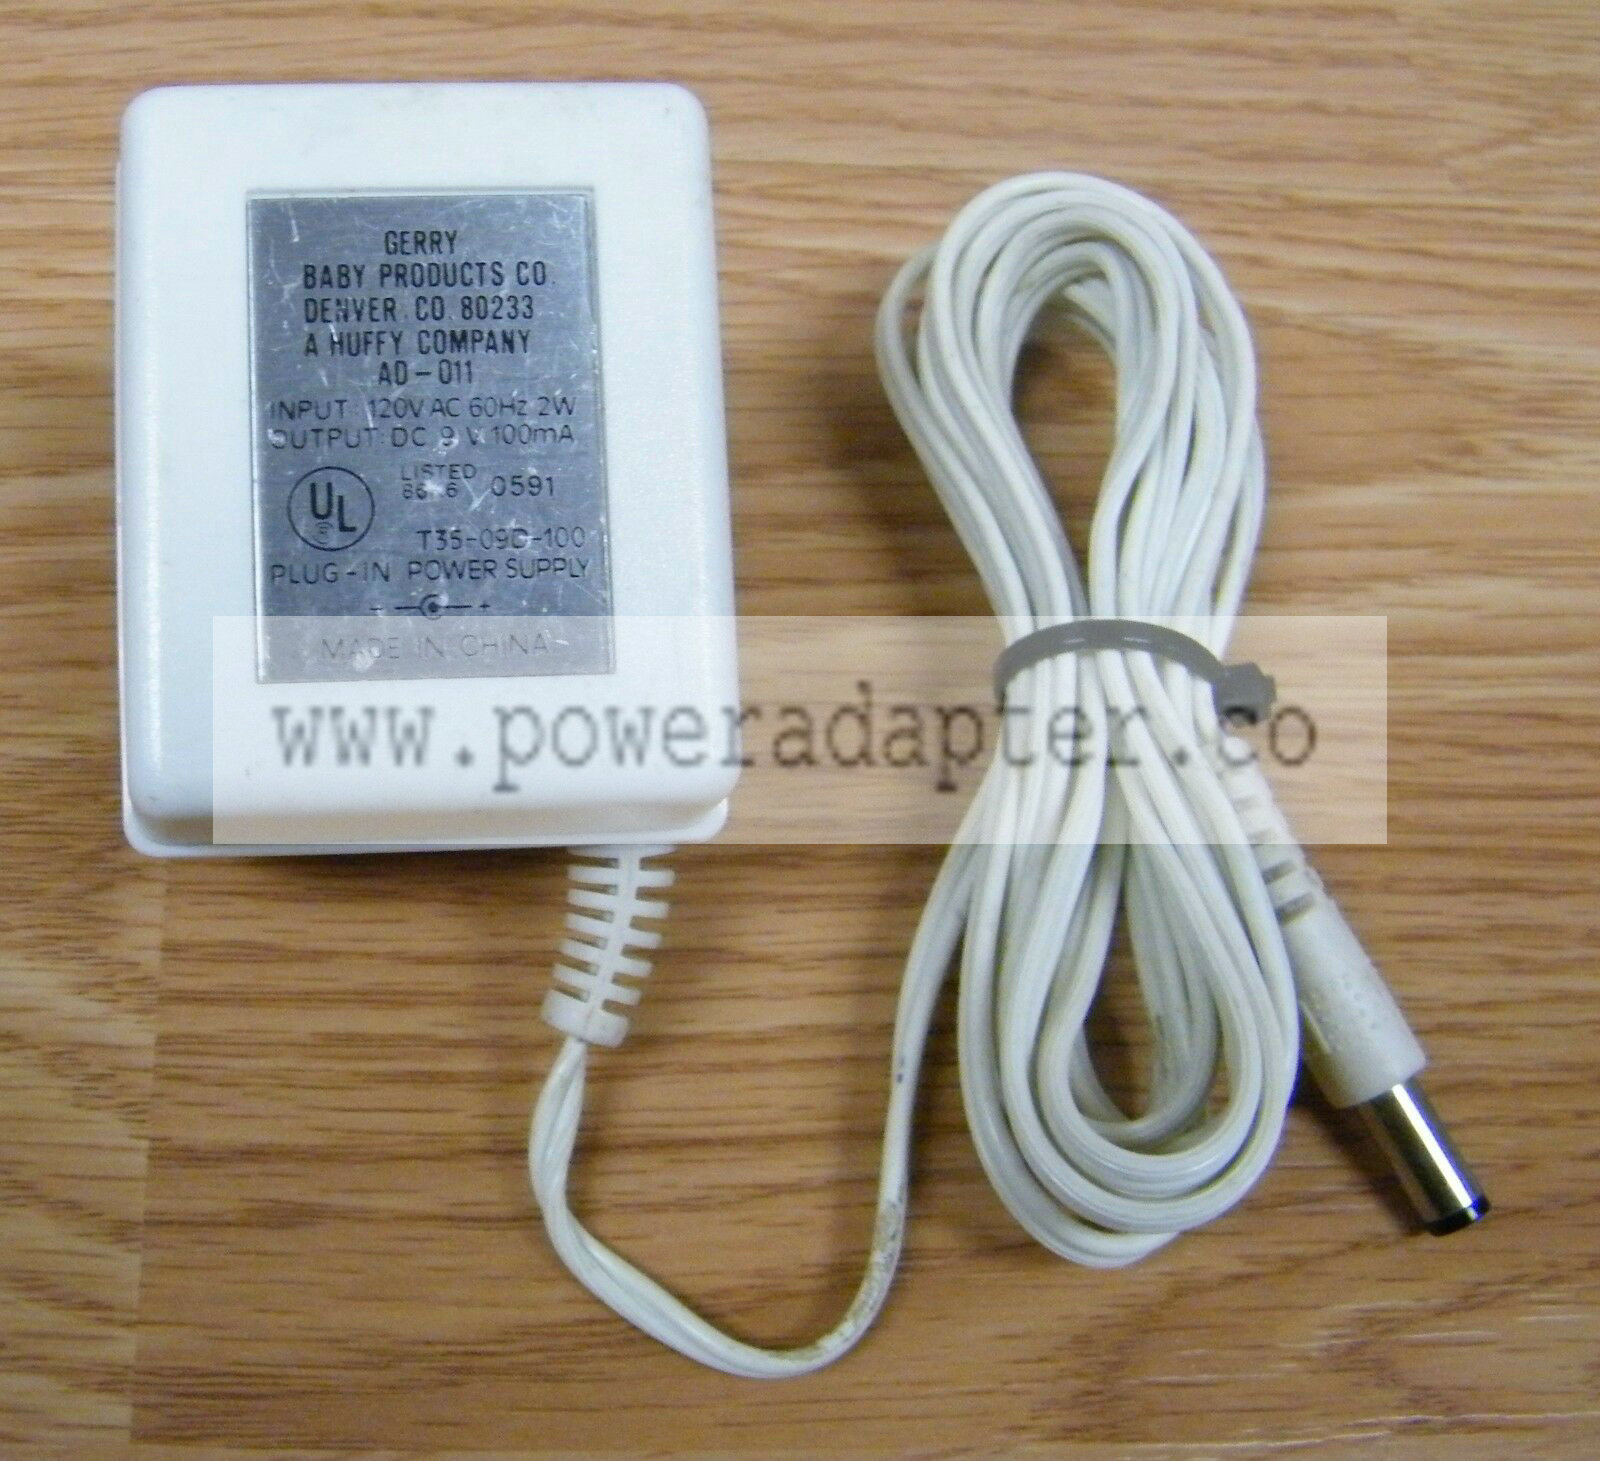 Genuine Gerry (AD-011) 9V 100mA 2W 60Hz AC Adapter Power Supply Charger Only Brand: Gerry Output Voltage: 9V Type: P - Click Image to Close